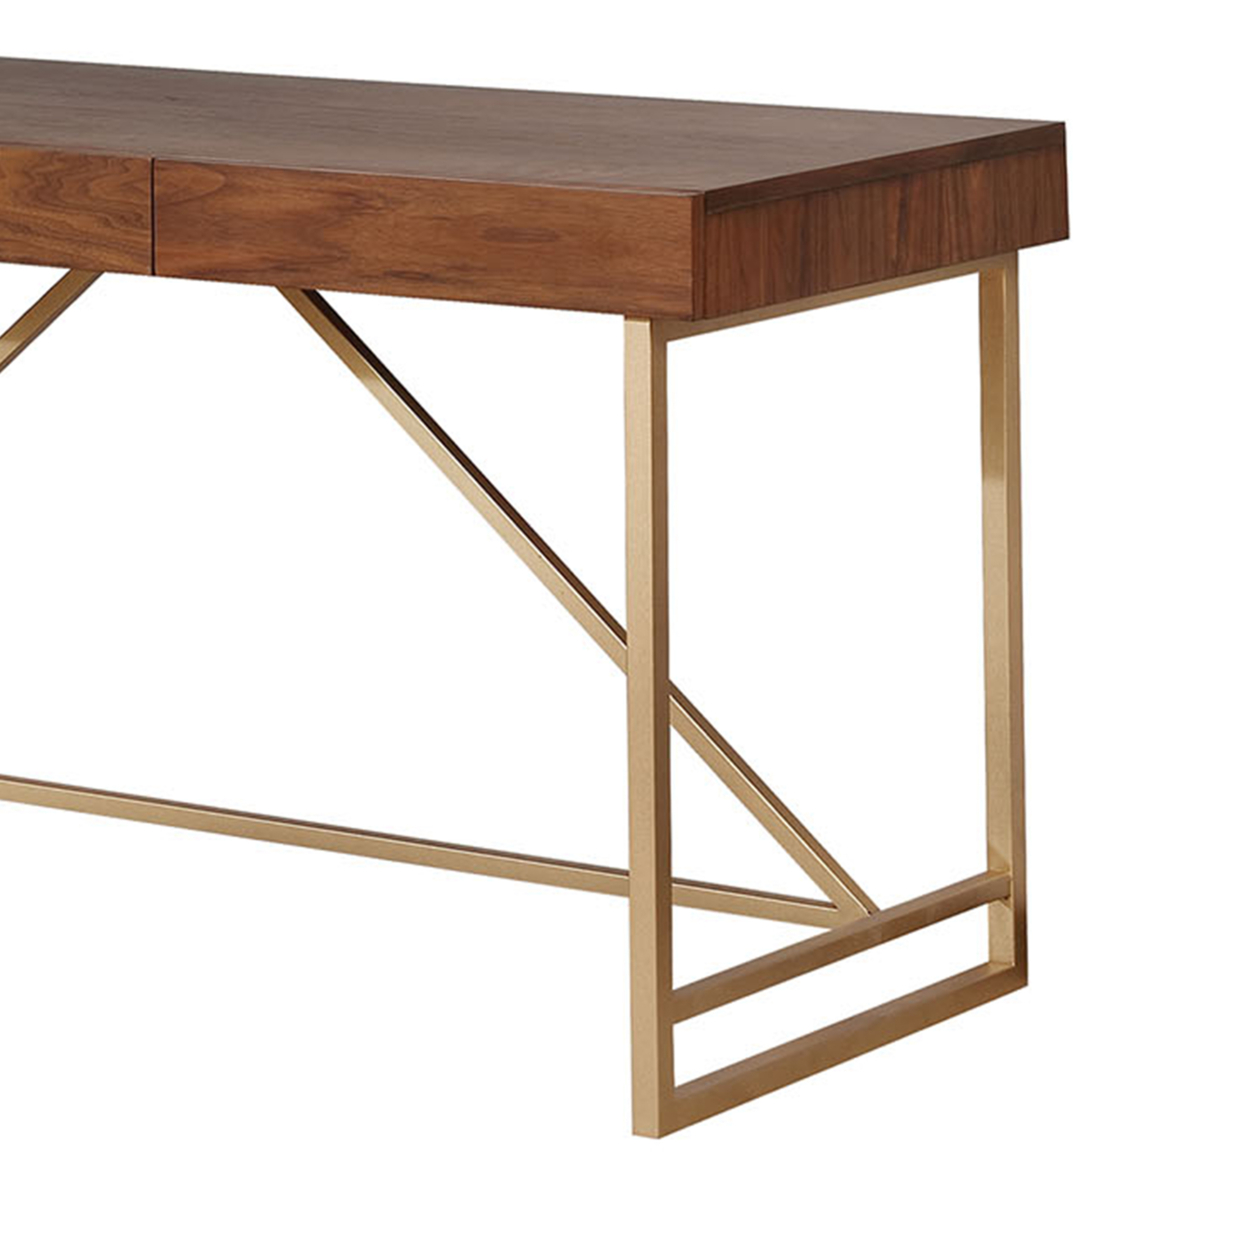 Modern Style Wooden Writing Desk With Unique Metal Legs, Walnut Brown And Gold- Saltoro Sherpi